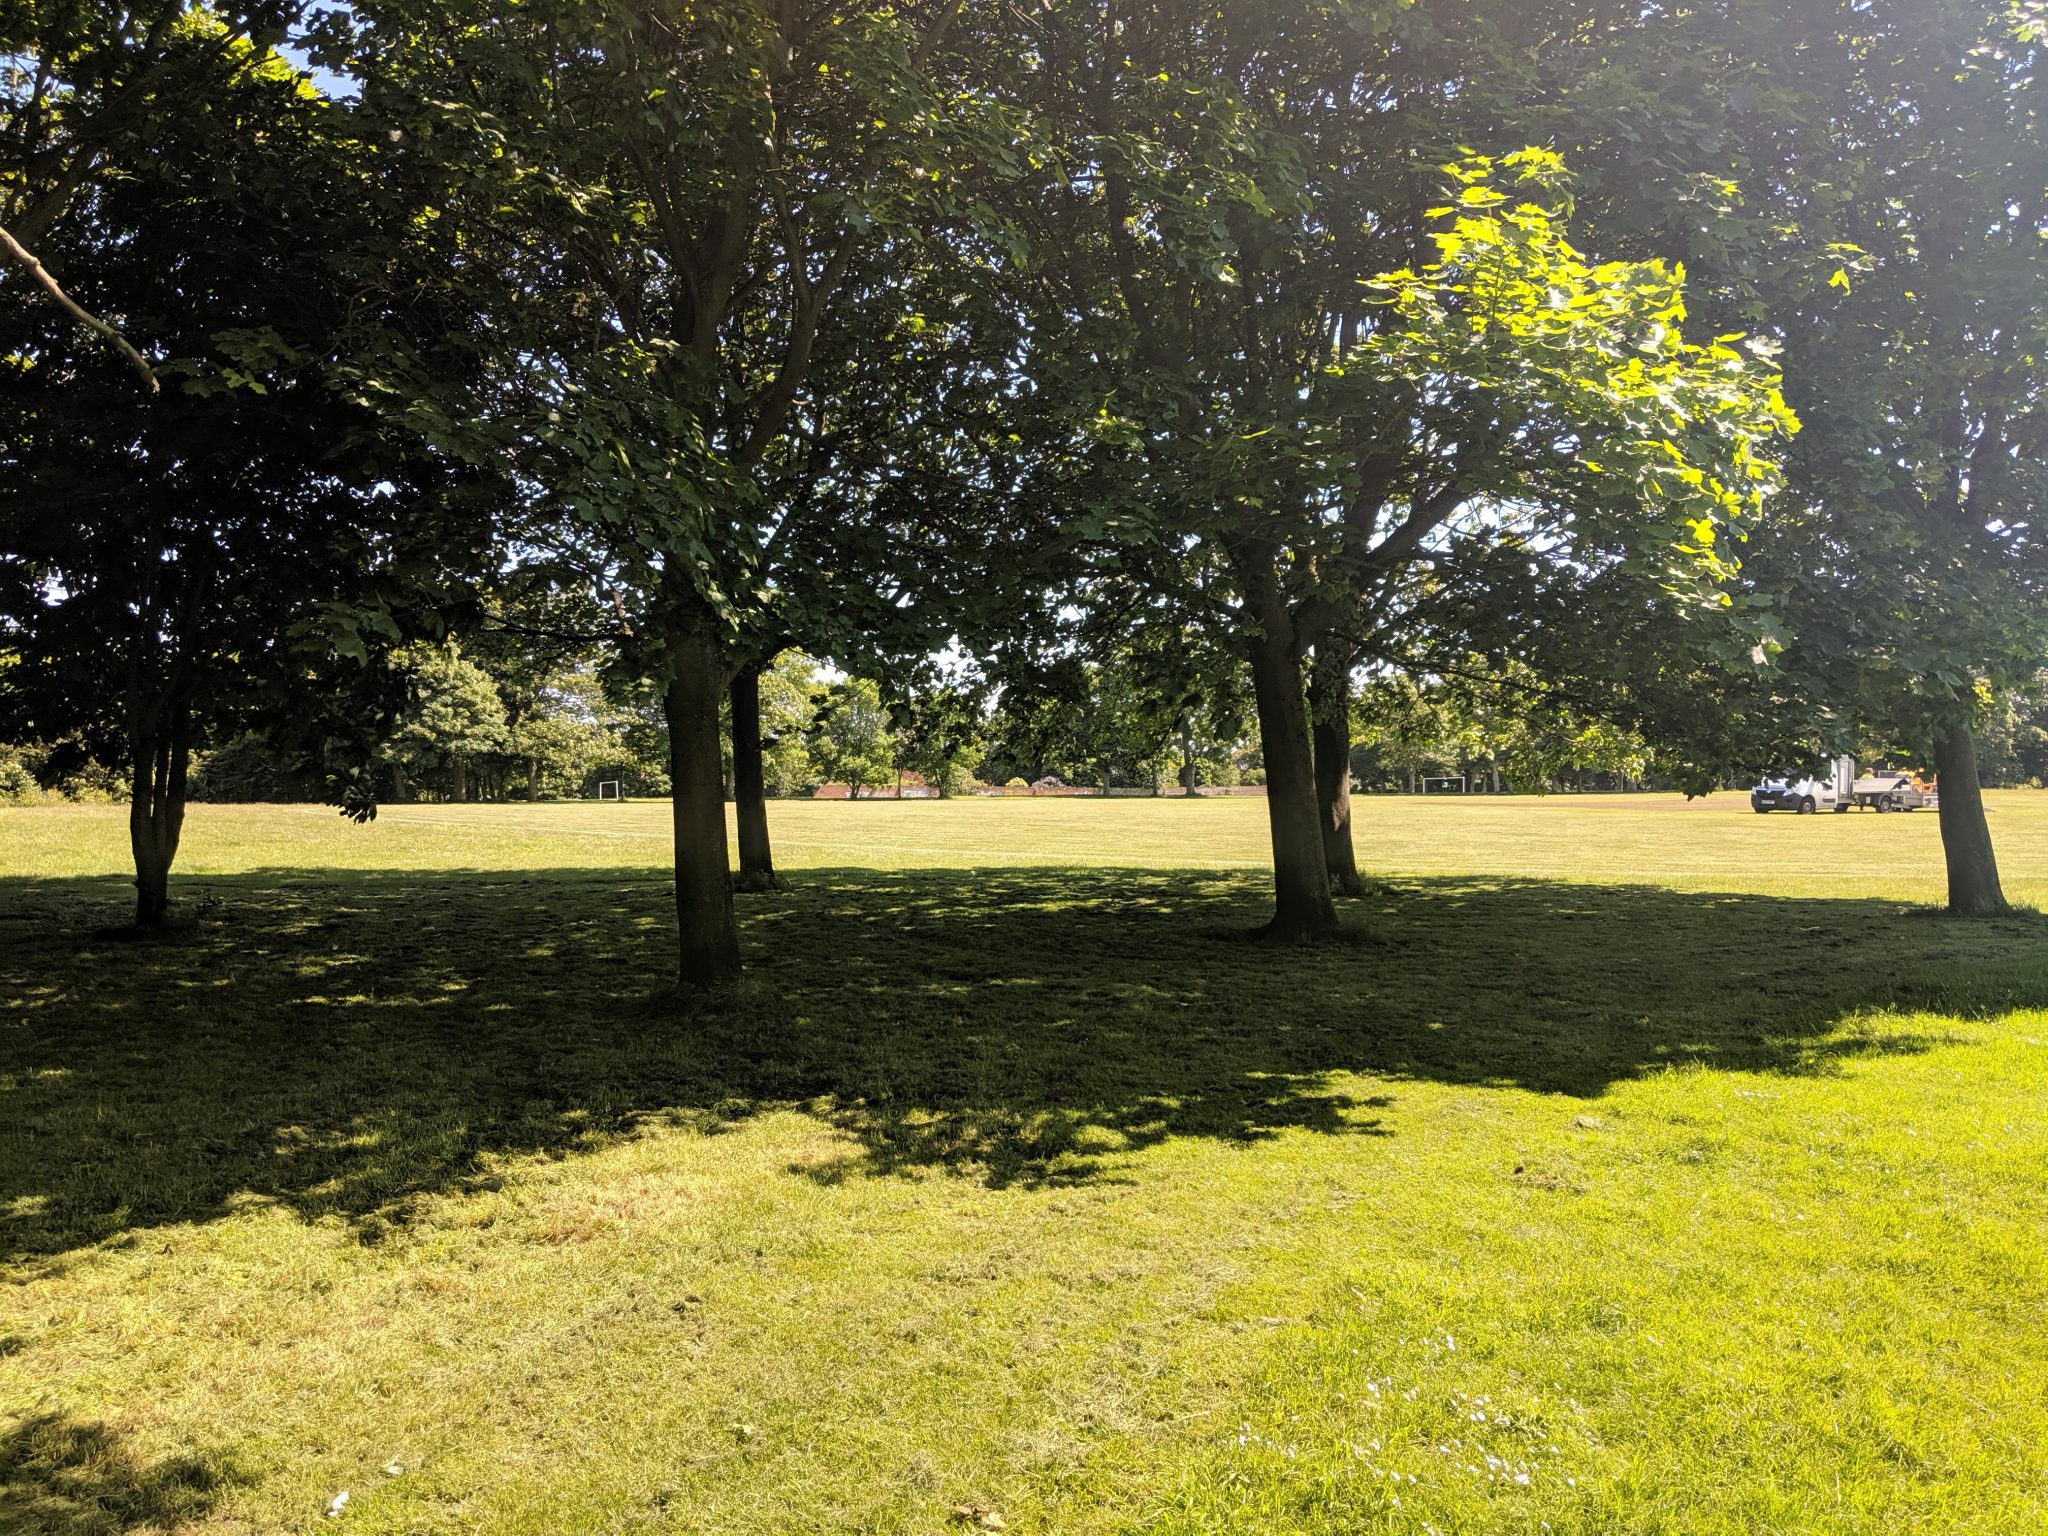 View of the grass area through the trees